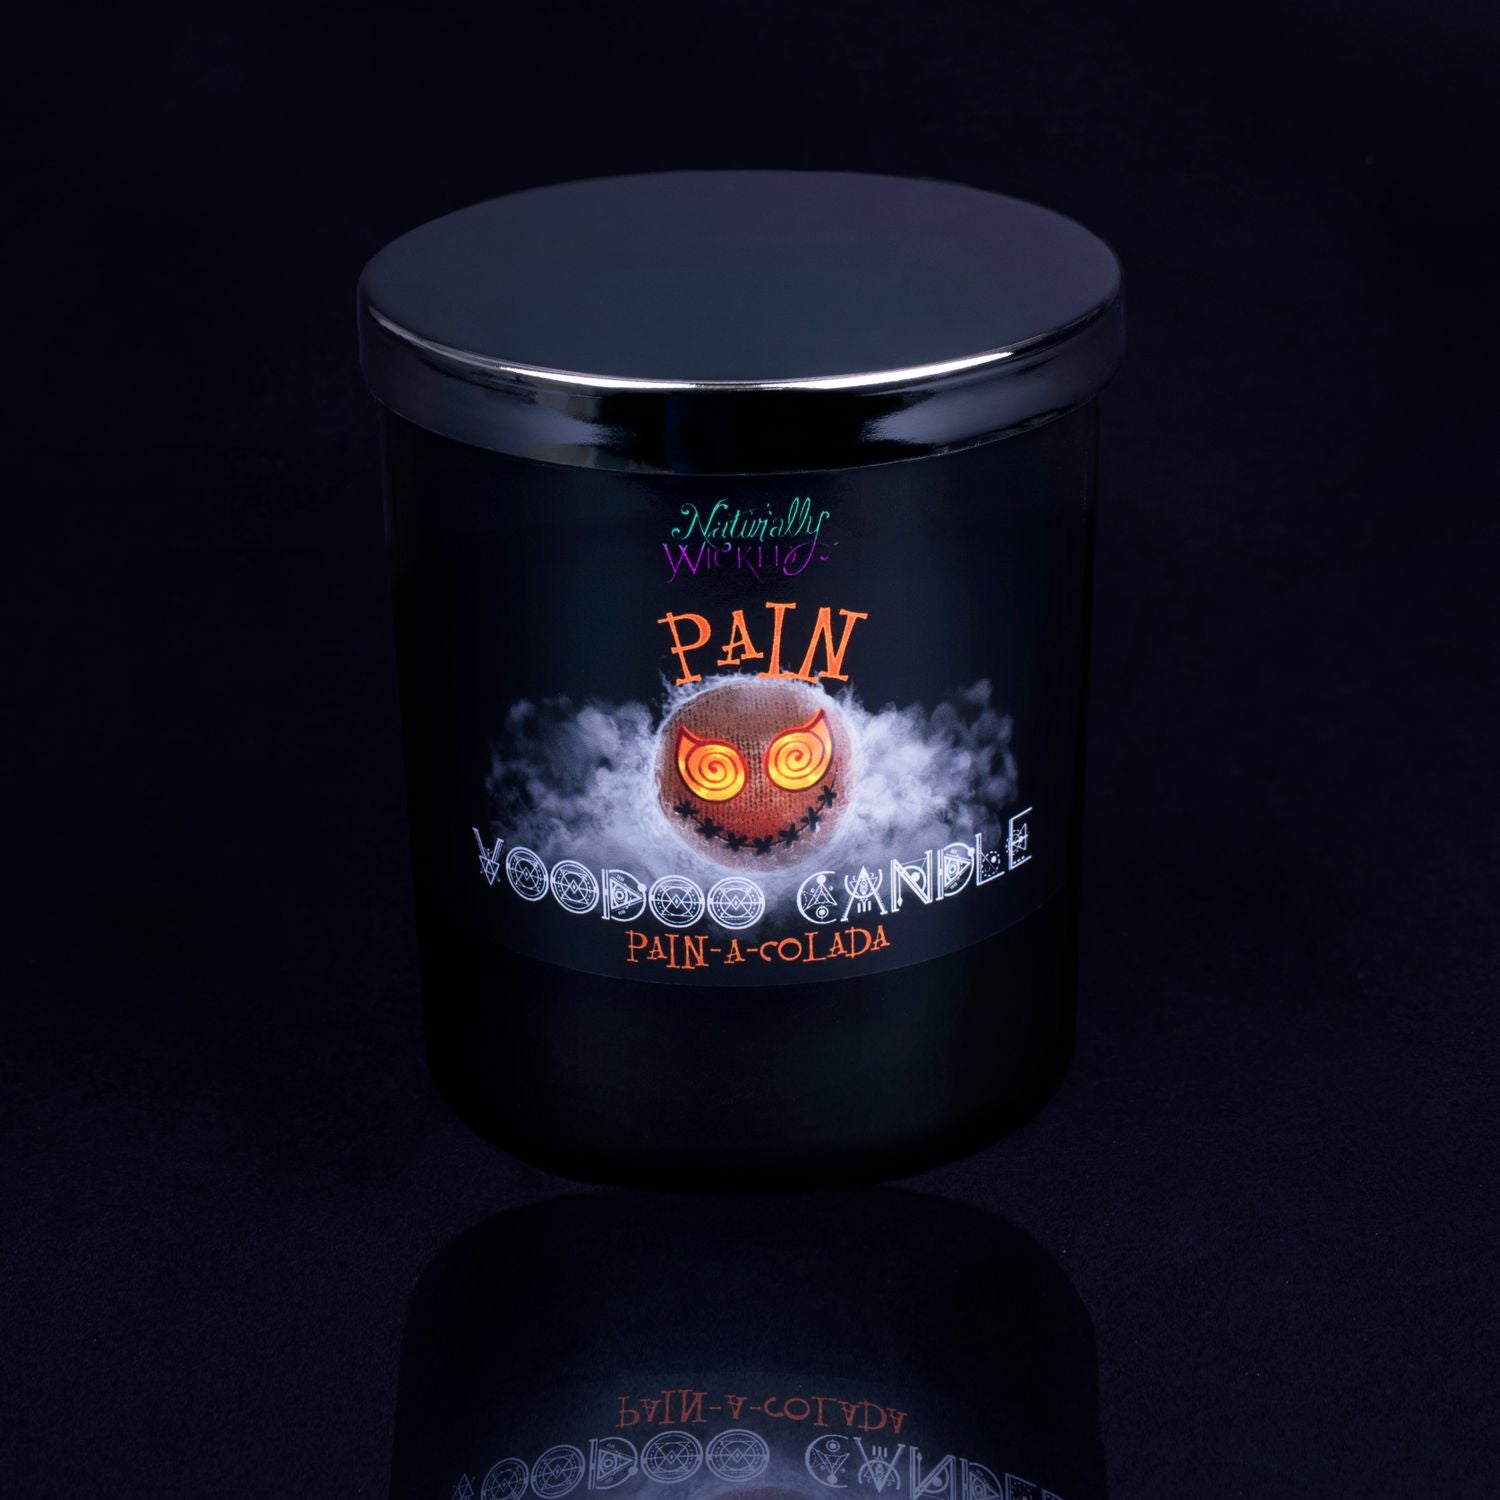 Naturally Wicked Voodoo Pain Spell Candle With Mirror Finished Exquisite Lid In Place. Featuring A Black Gloss Label, A Voodoo Doll Design And Pain-A-Colada Scent.